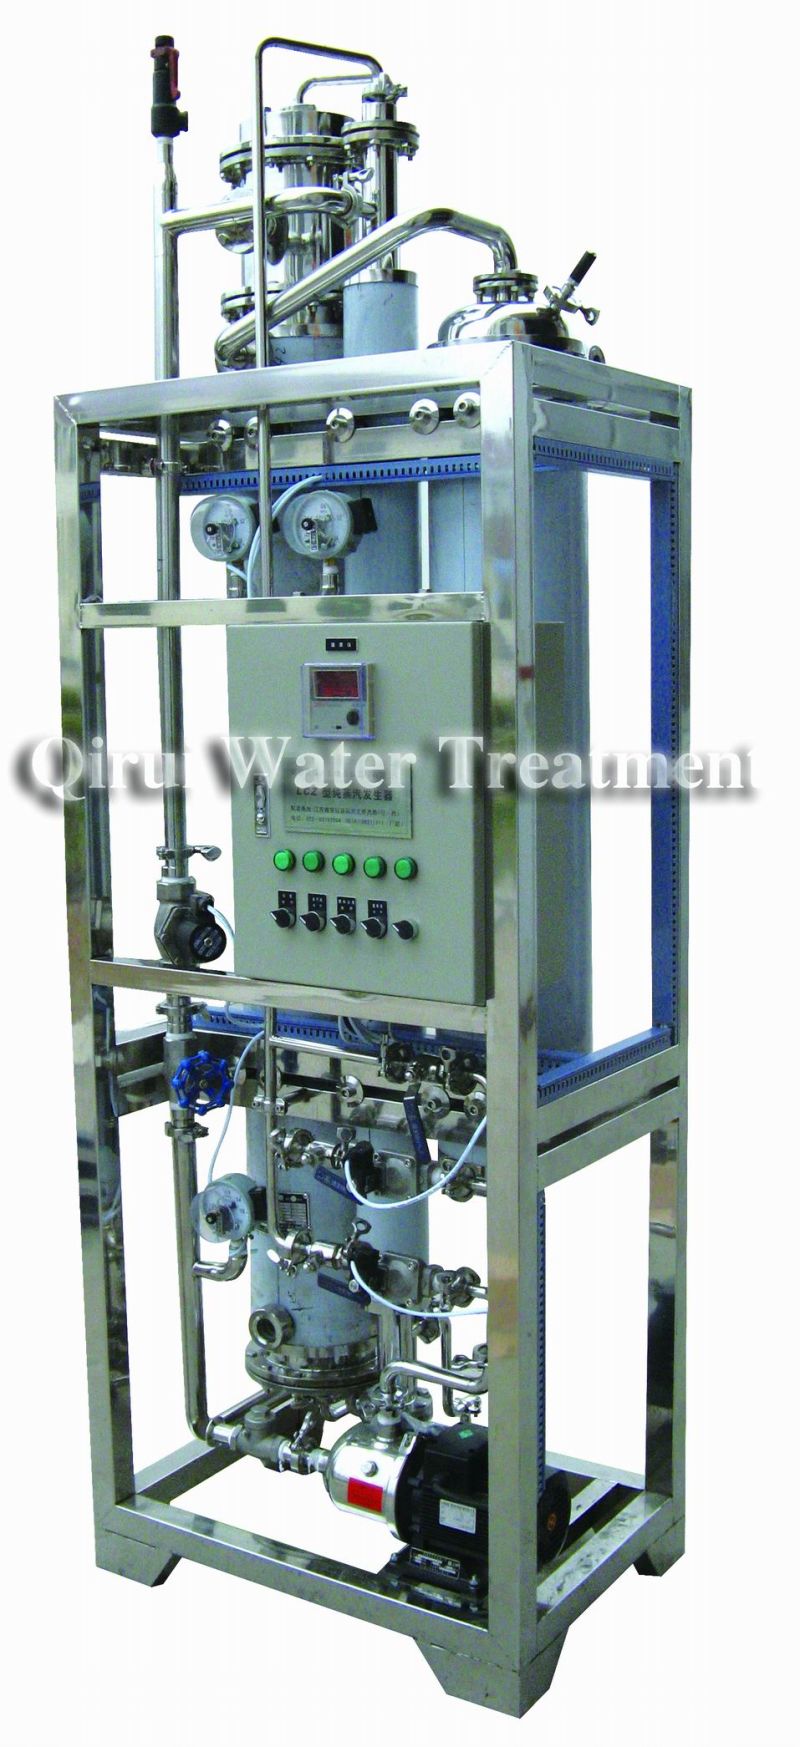 Steam Heated Pure Vapour Generator(PSG) for Sterilization Use